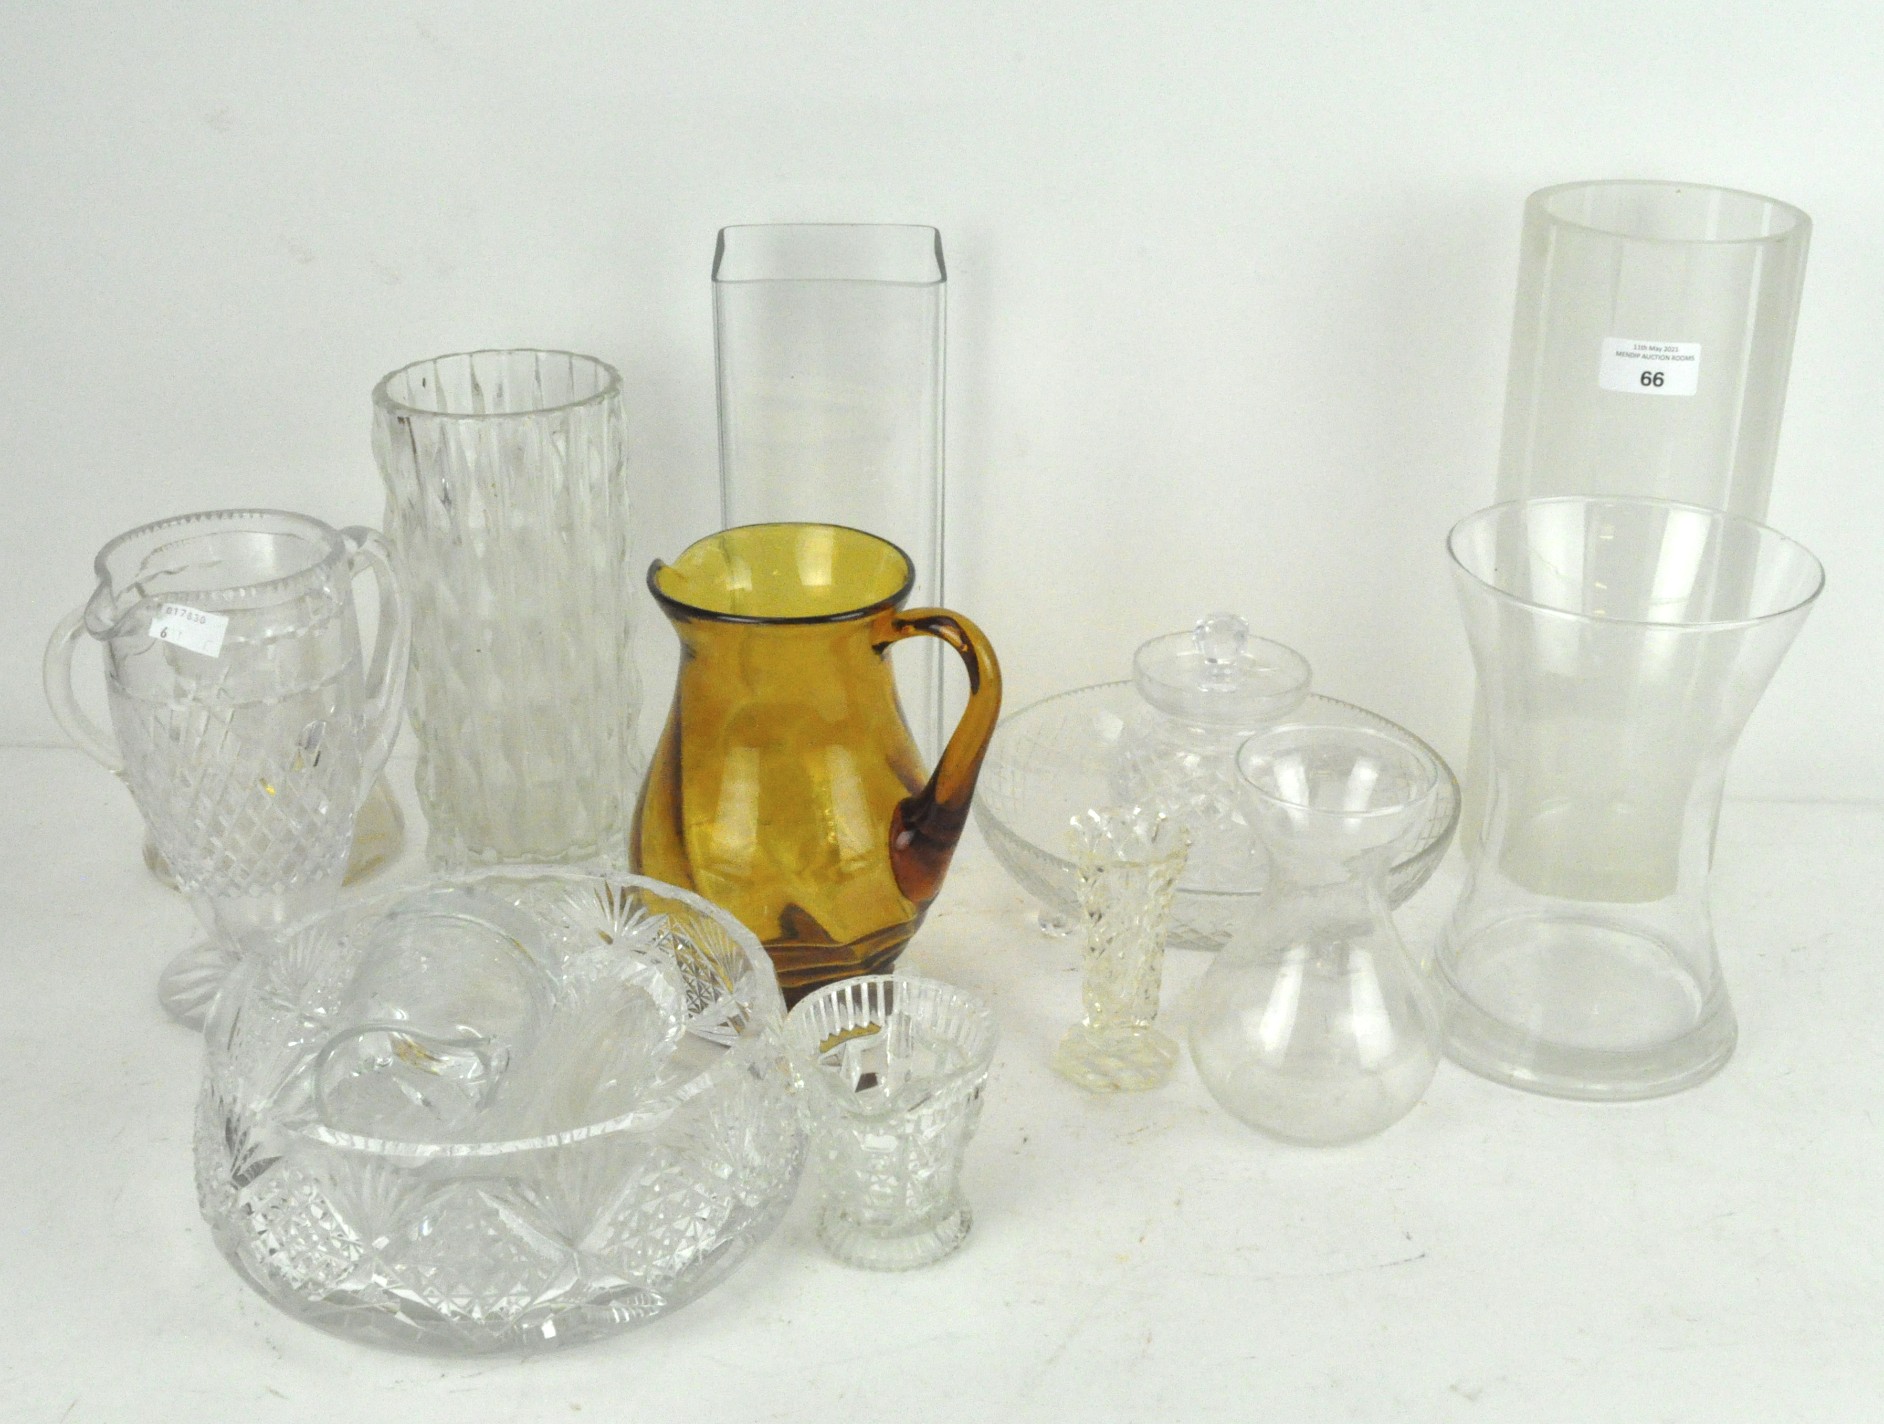 A collection of assorted cut glass and other glassware, including bowls jugs and vases.